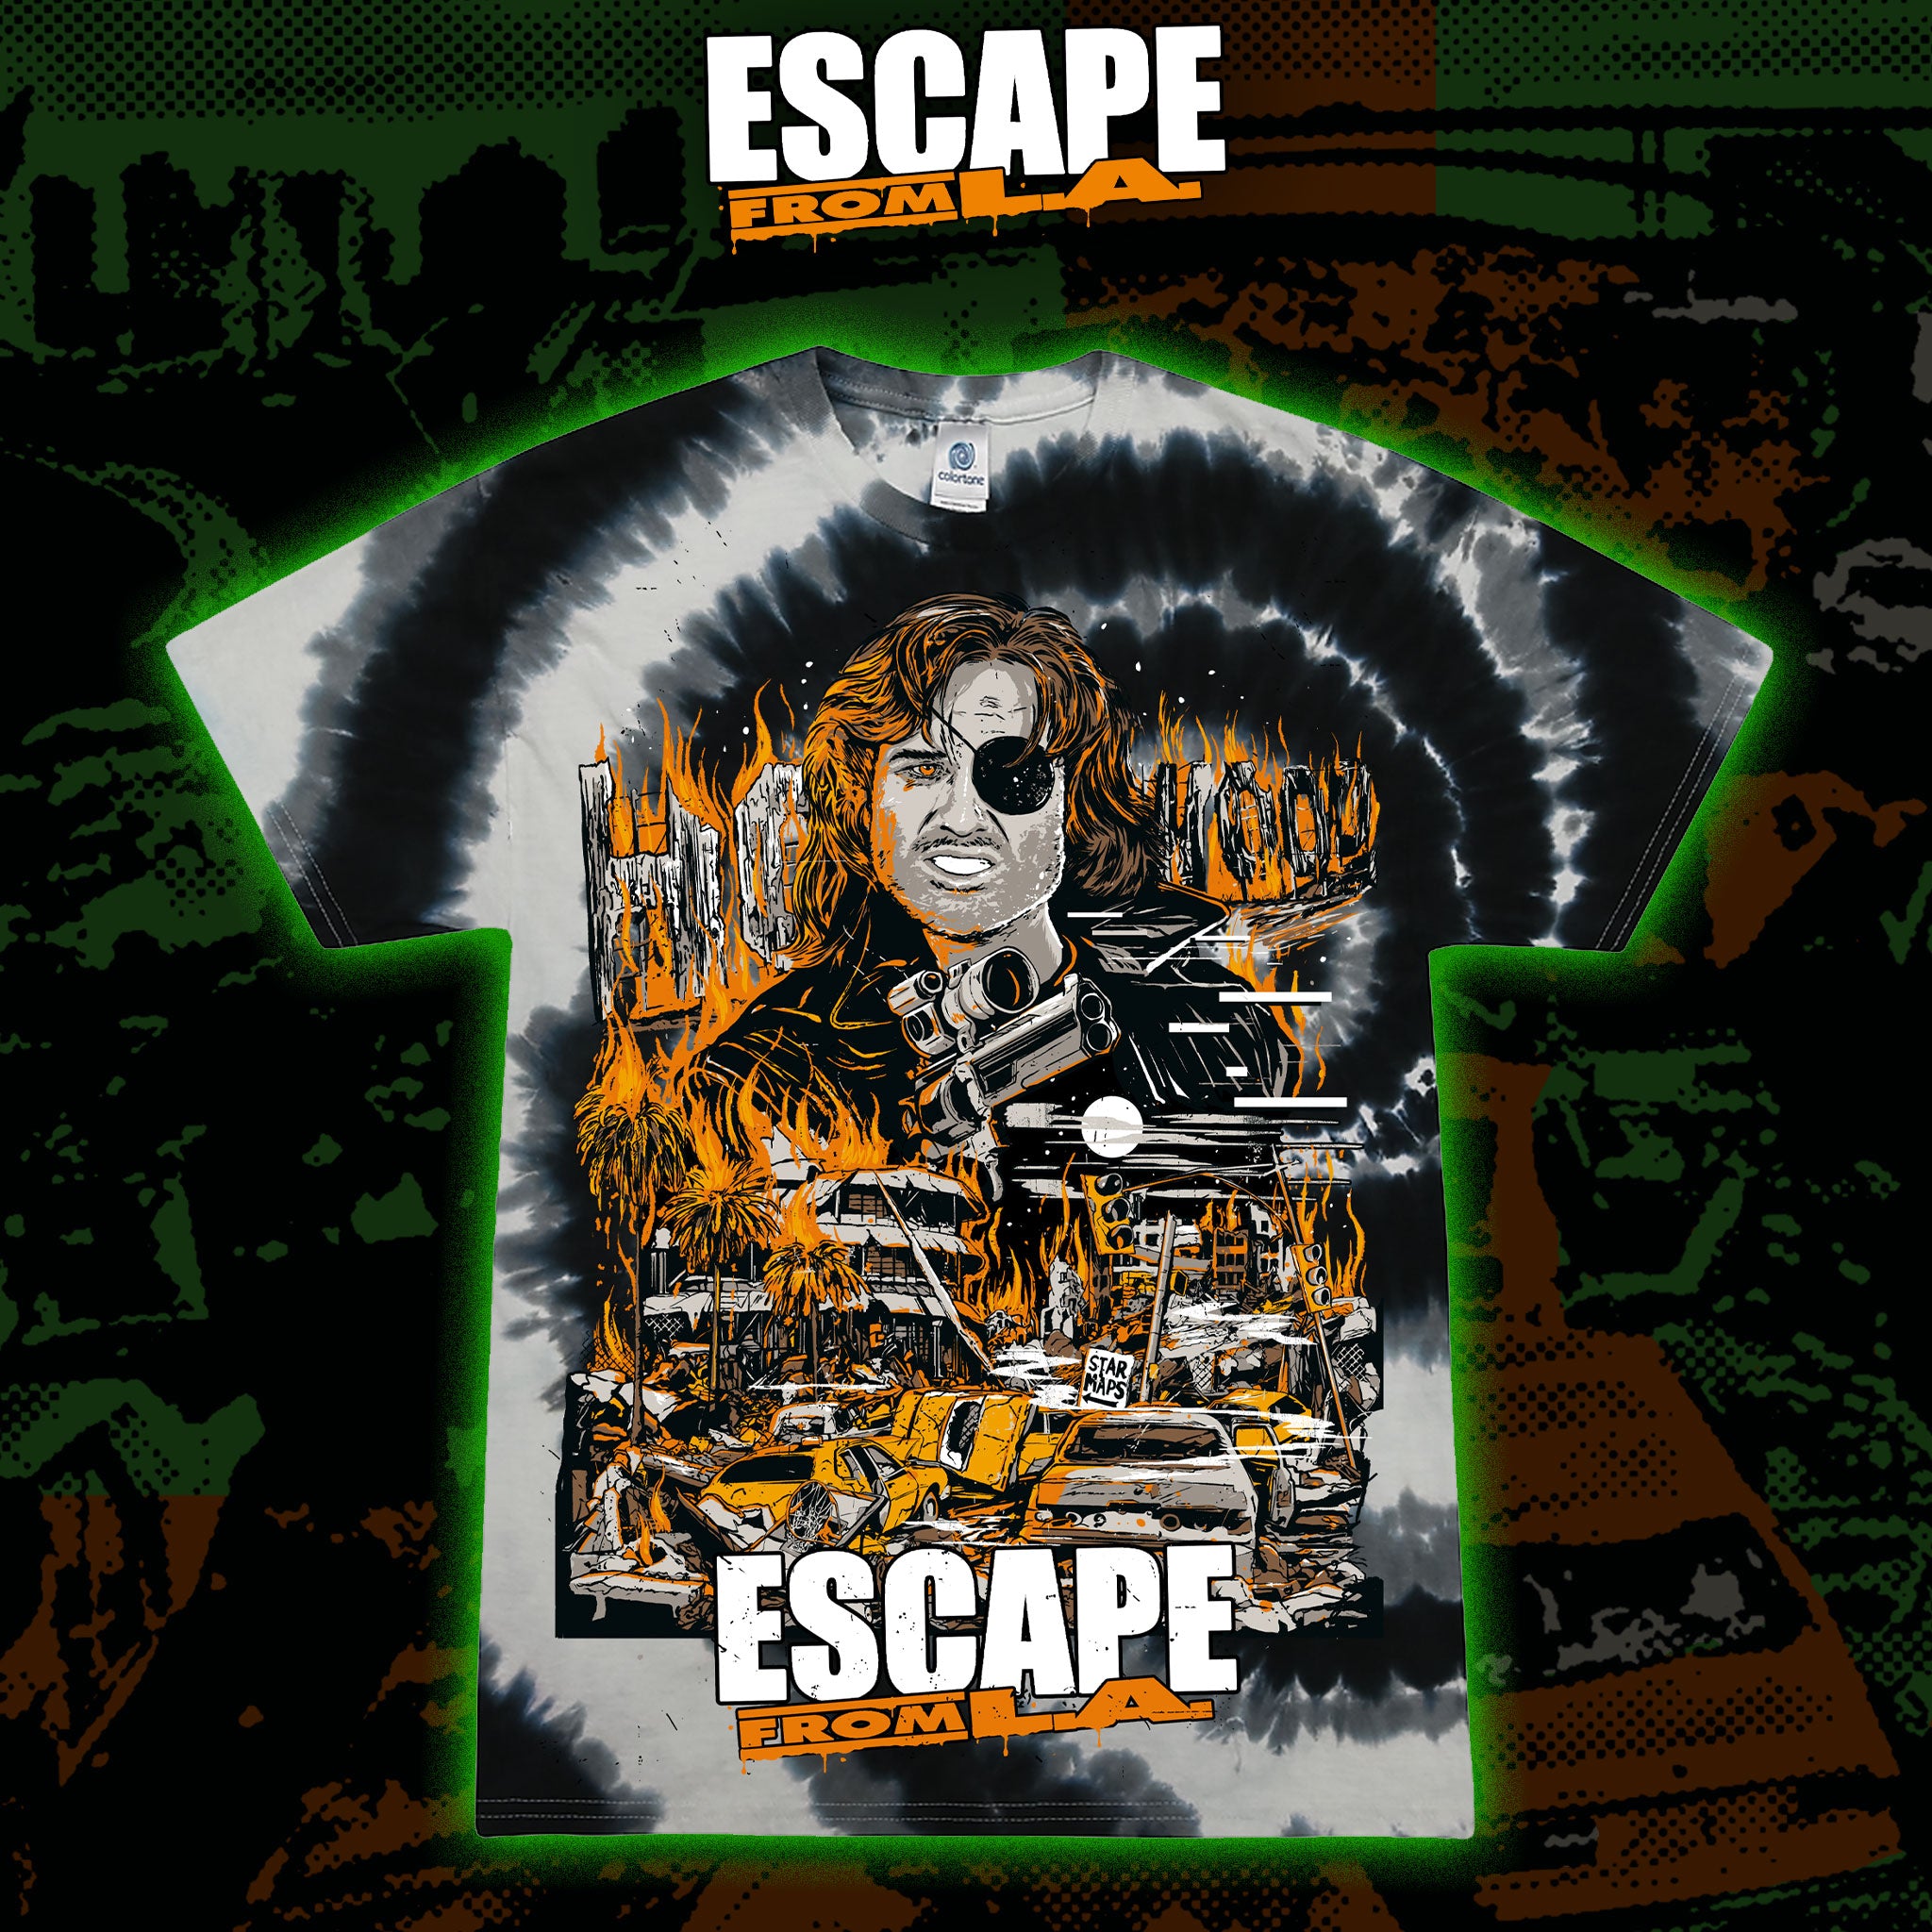 Escape from L.A. "The Future is Now" Tie dye